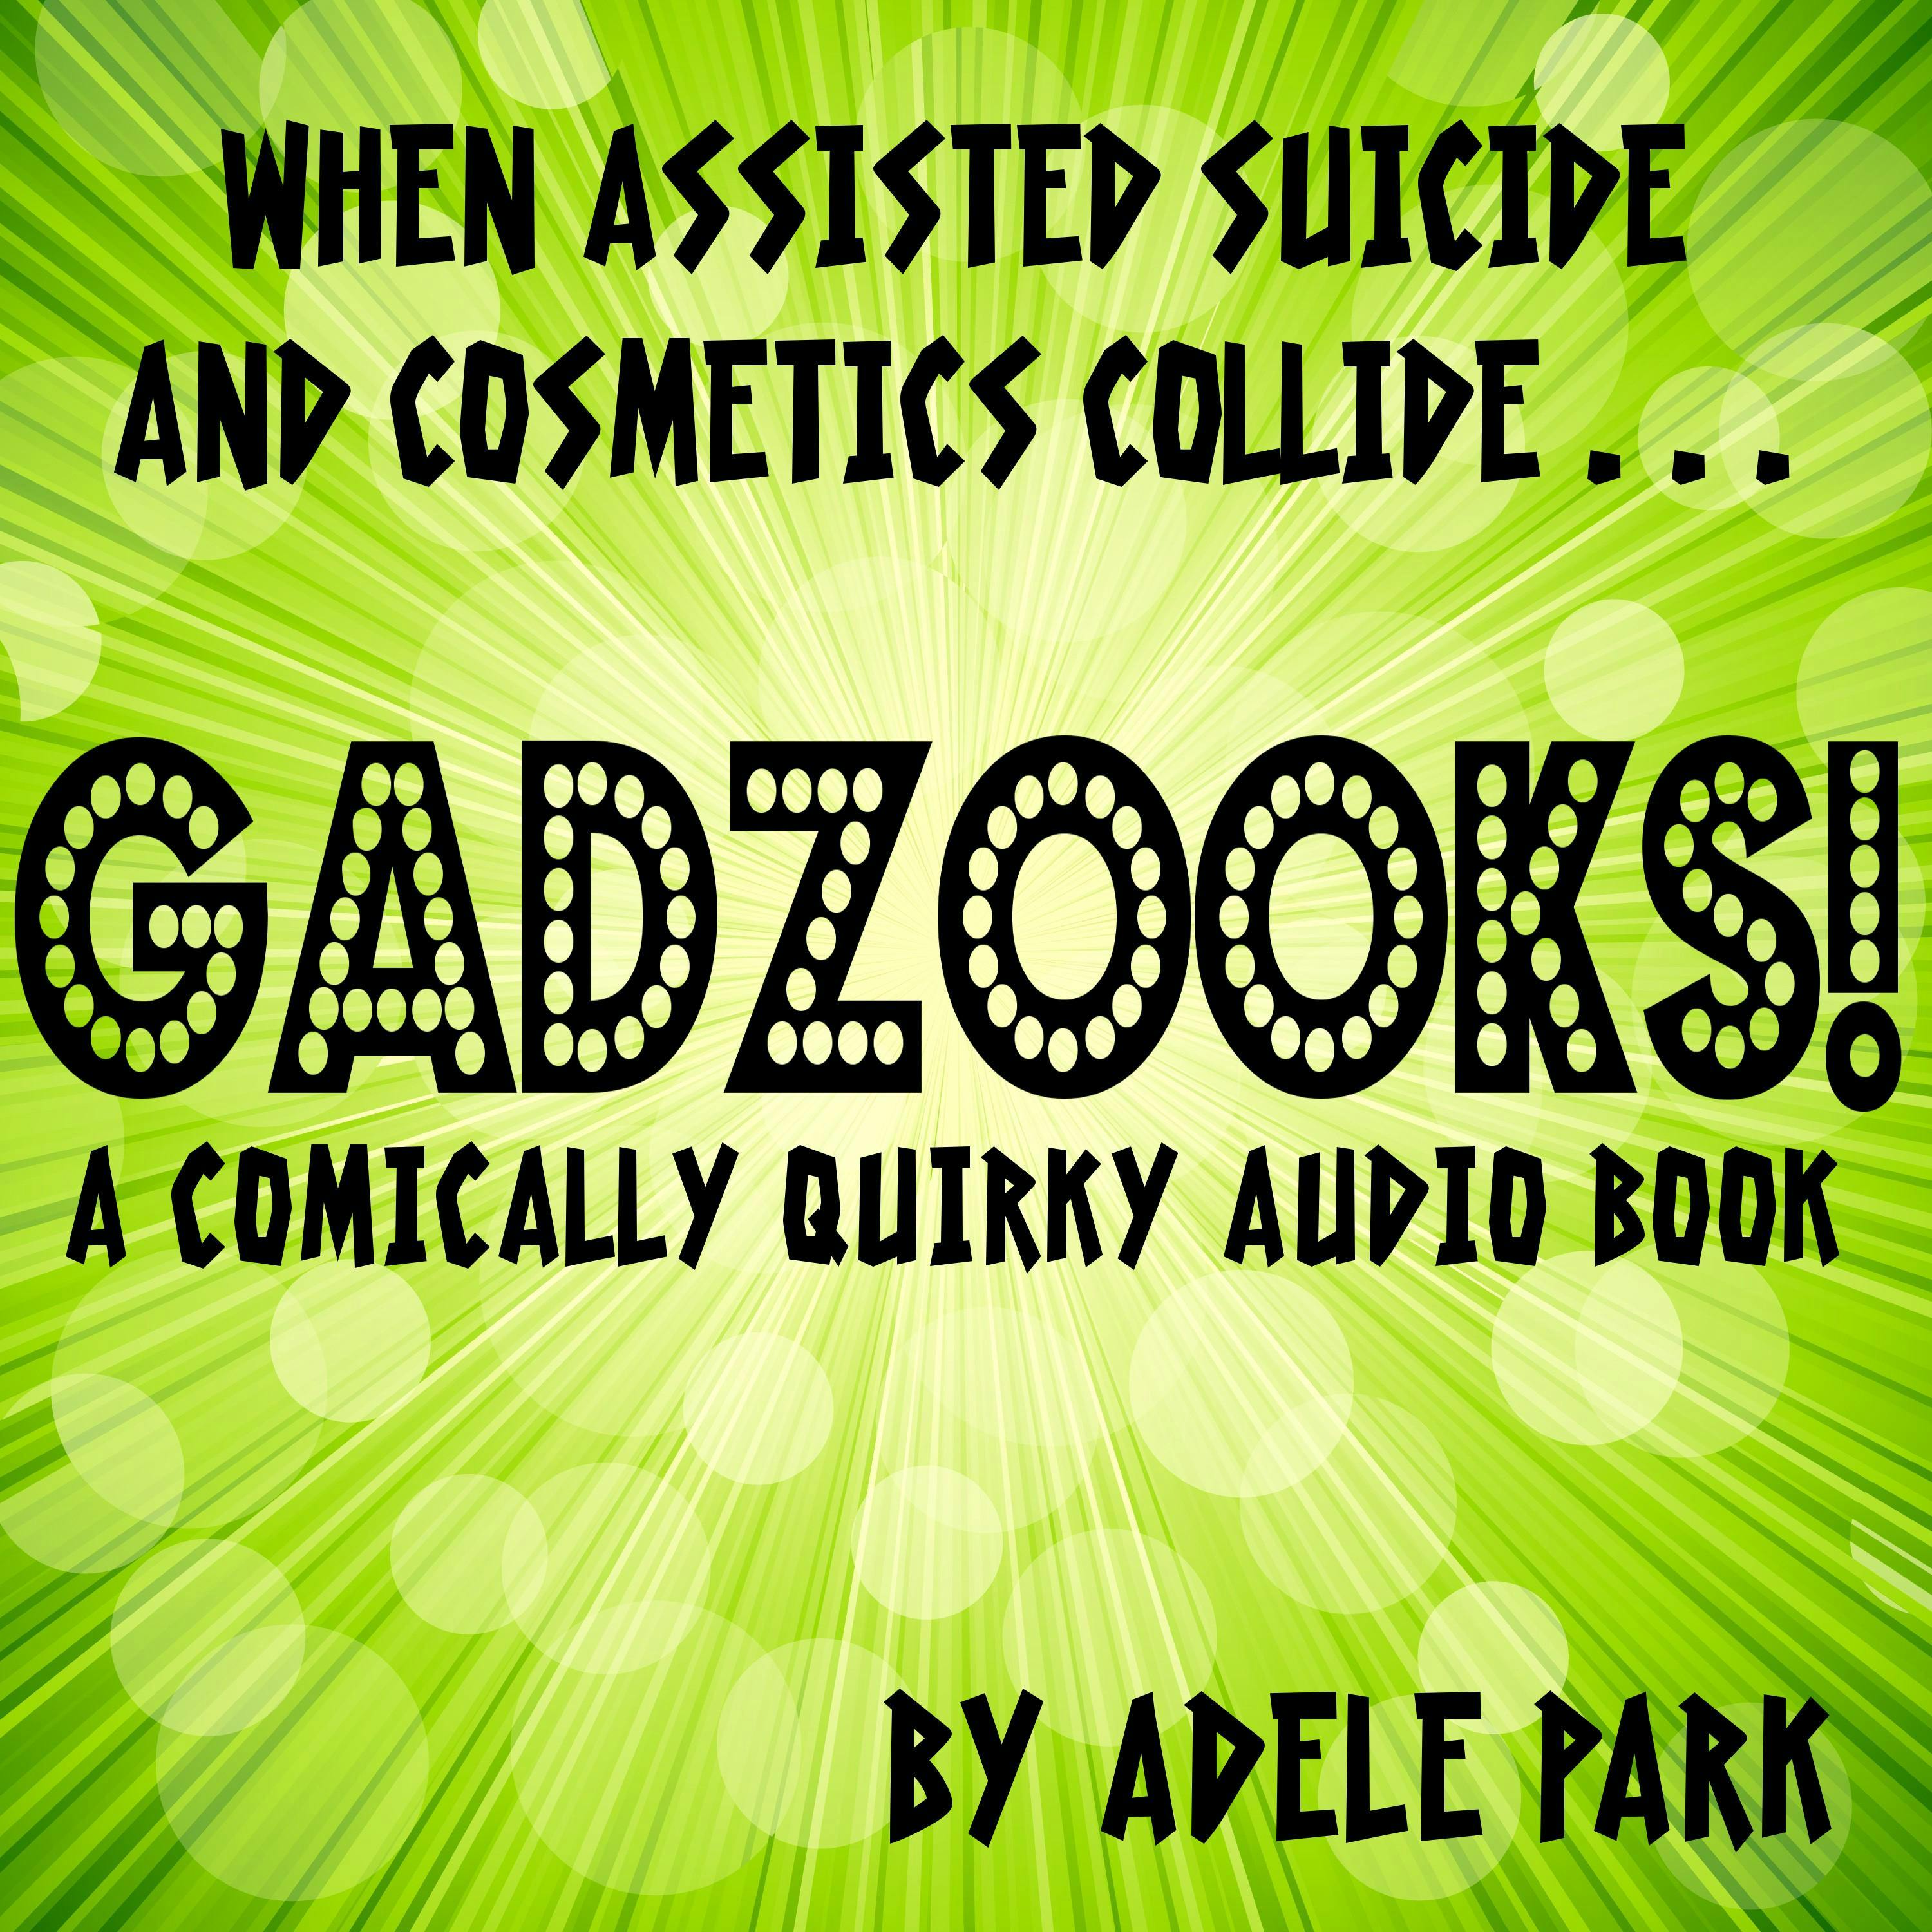 Gadzooks! A Comically Quirky Audio Book: When Assisted Suicide And Cosmetics Collide - Adele Park